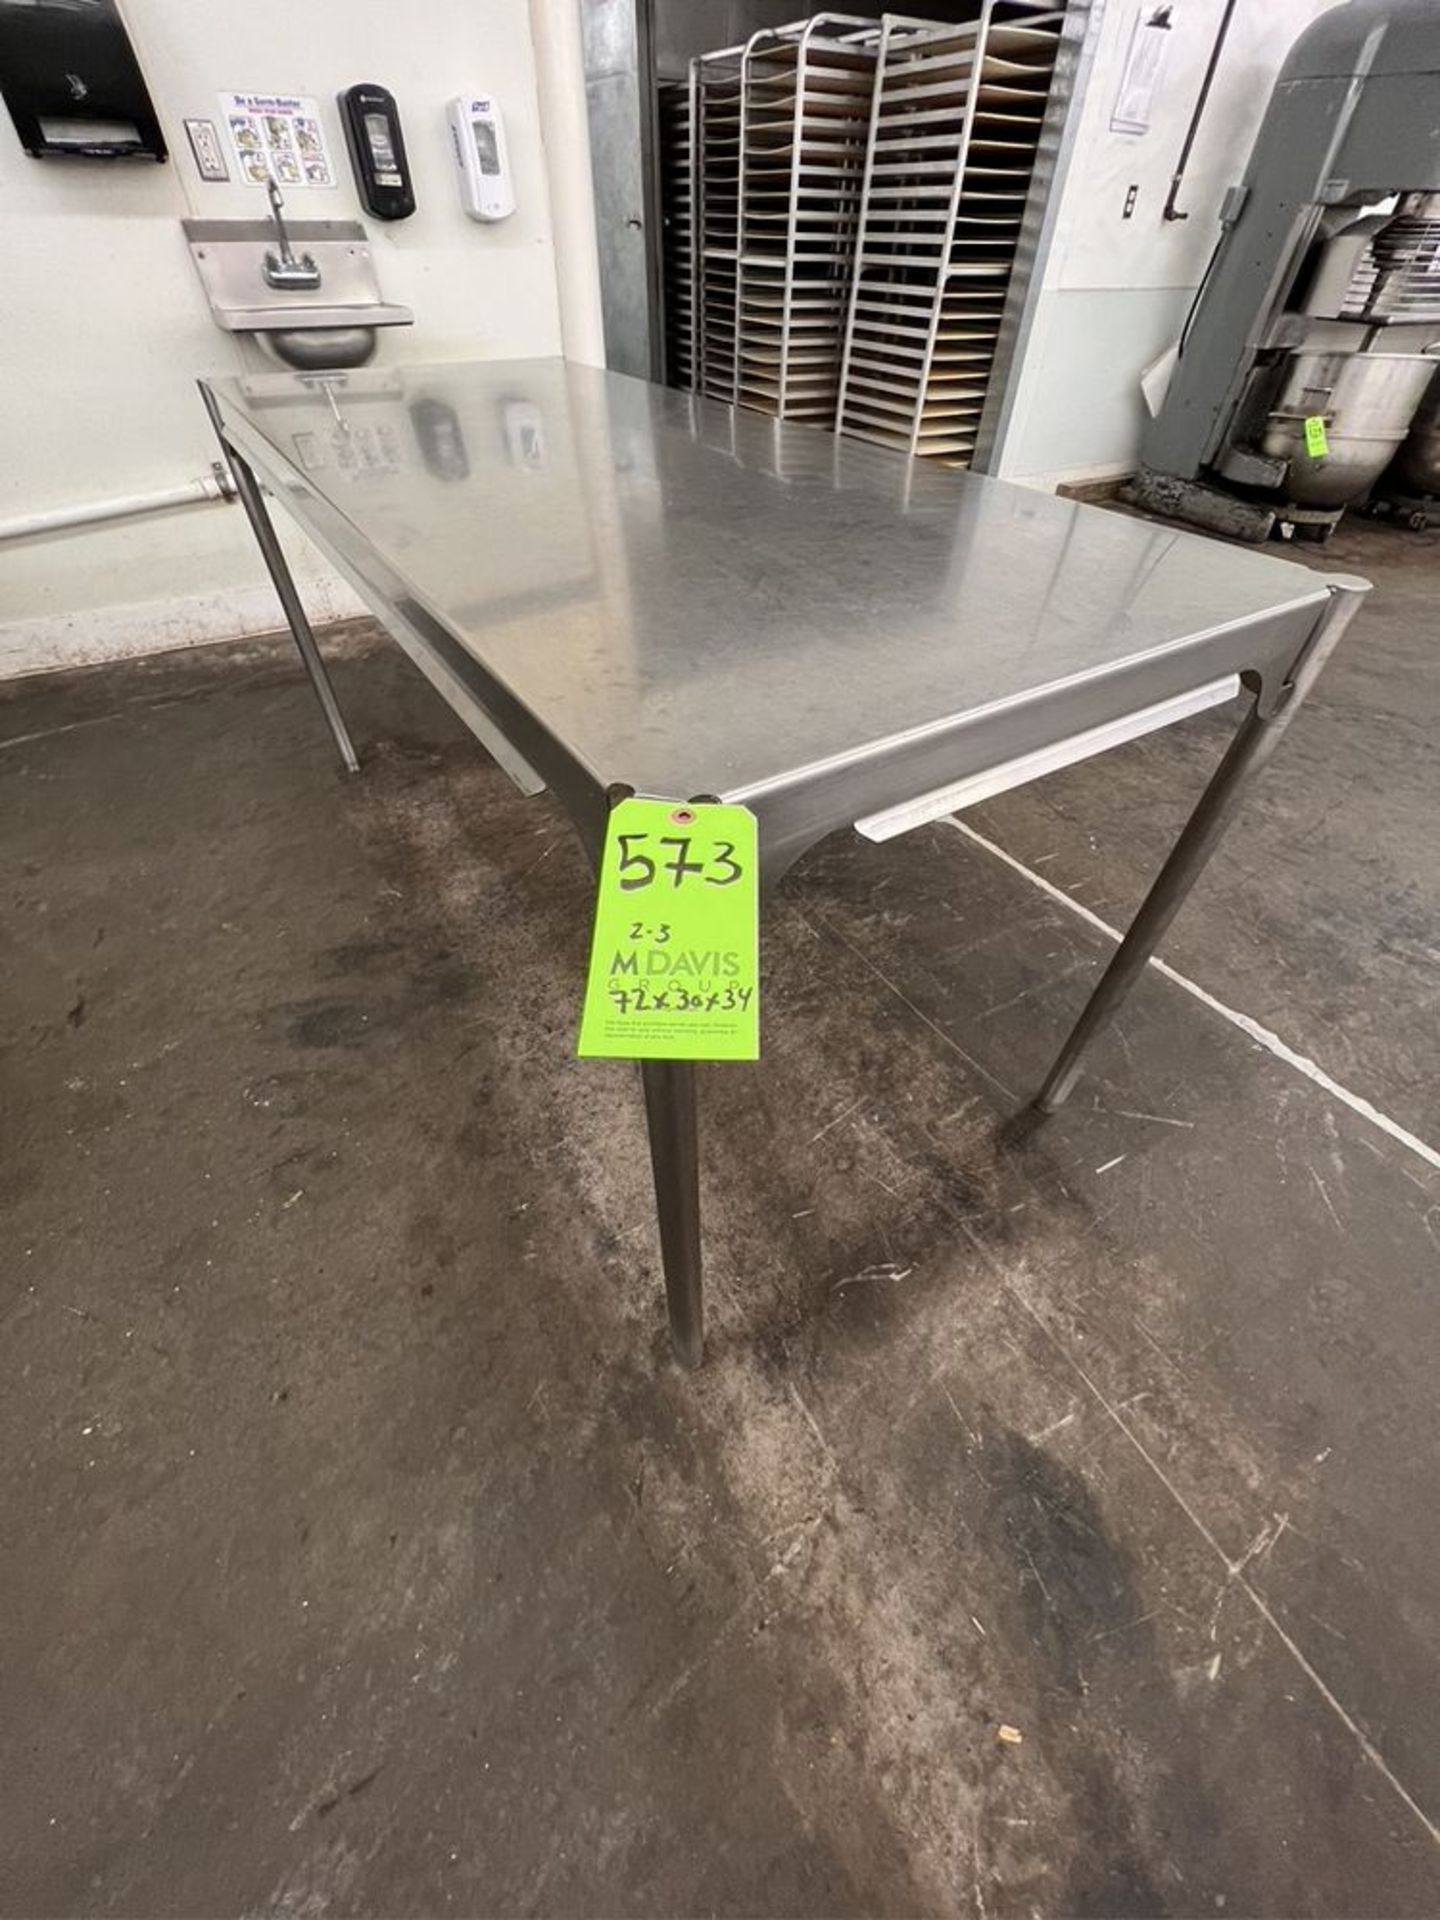 (3) S/S TABLES, (1) WITH EDLUND CAN OPENER,  APPROX. DIMS 72 X 30 X 34, 72 X 30 X 34, 72 X 30 X 32 - Bild 4 aus 5